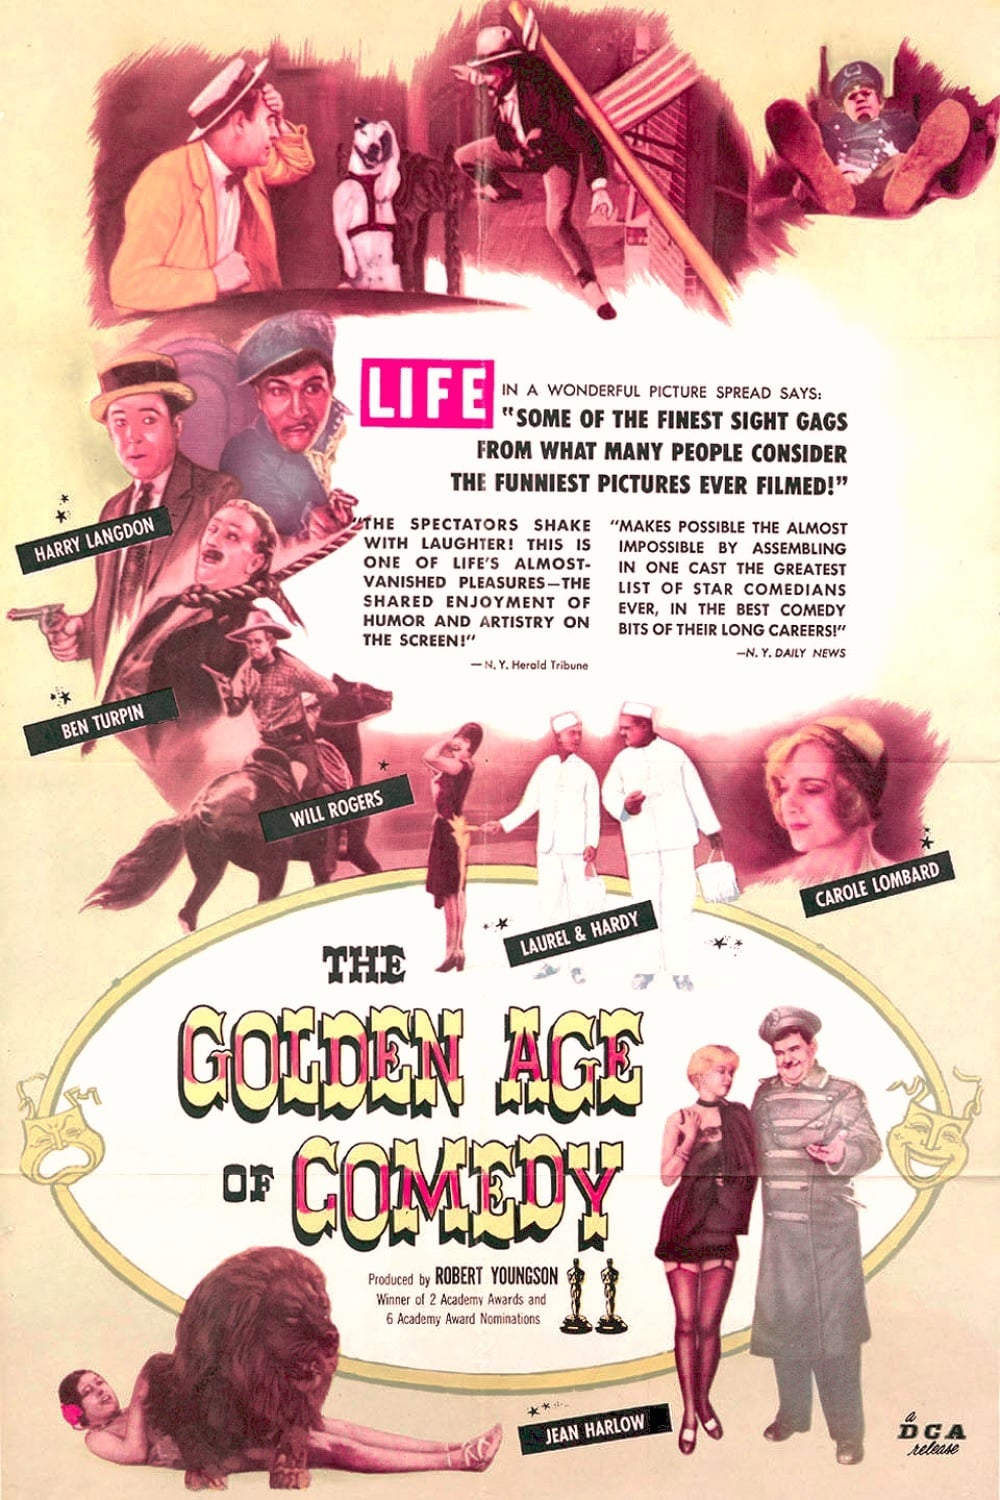 Poster for the movie "The Golden Age of Comedy"